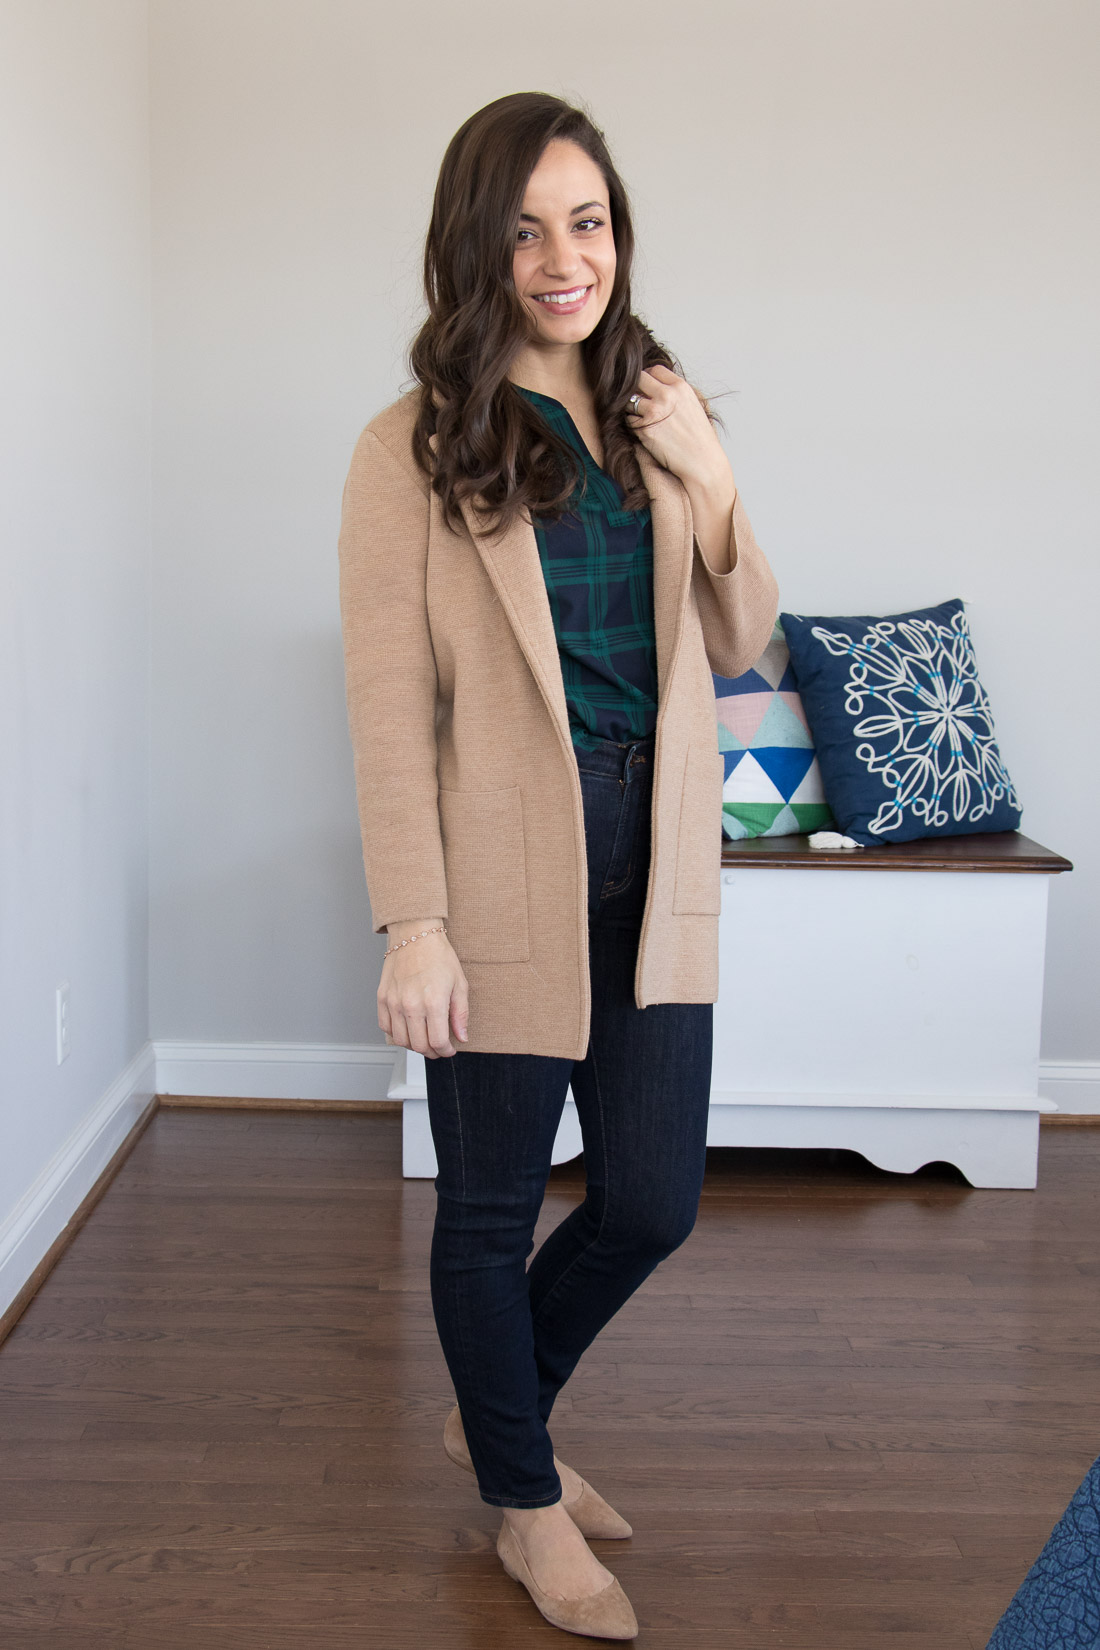 Movie Date Night Outfit - casual date night makeup and outfit idea.